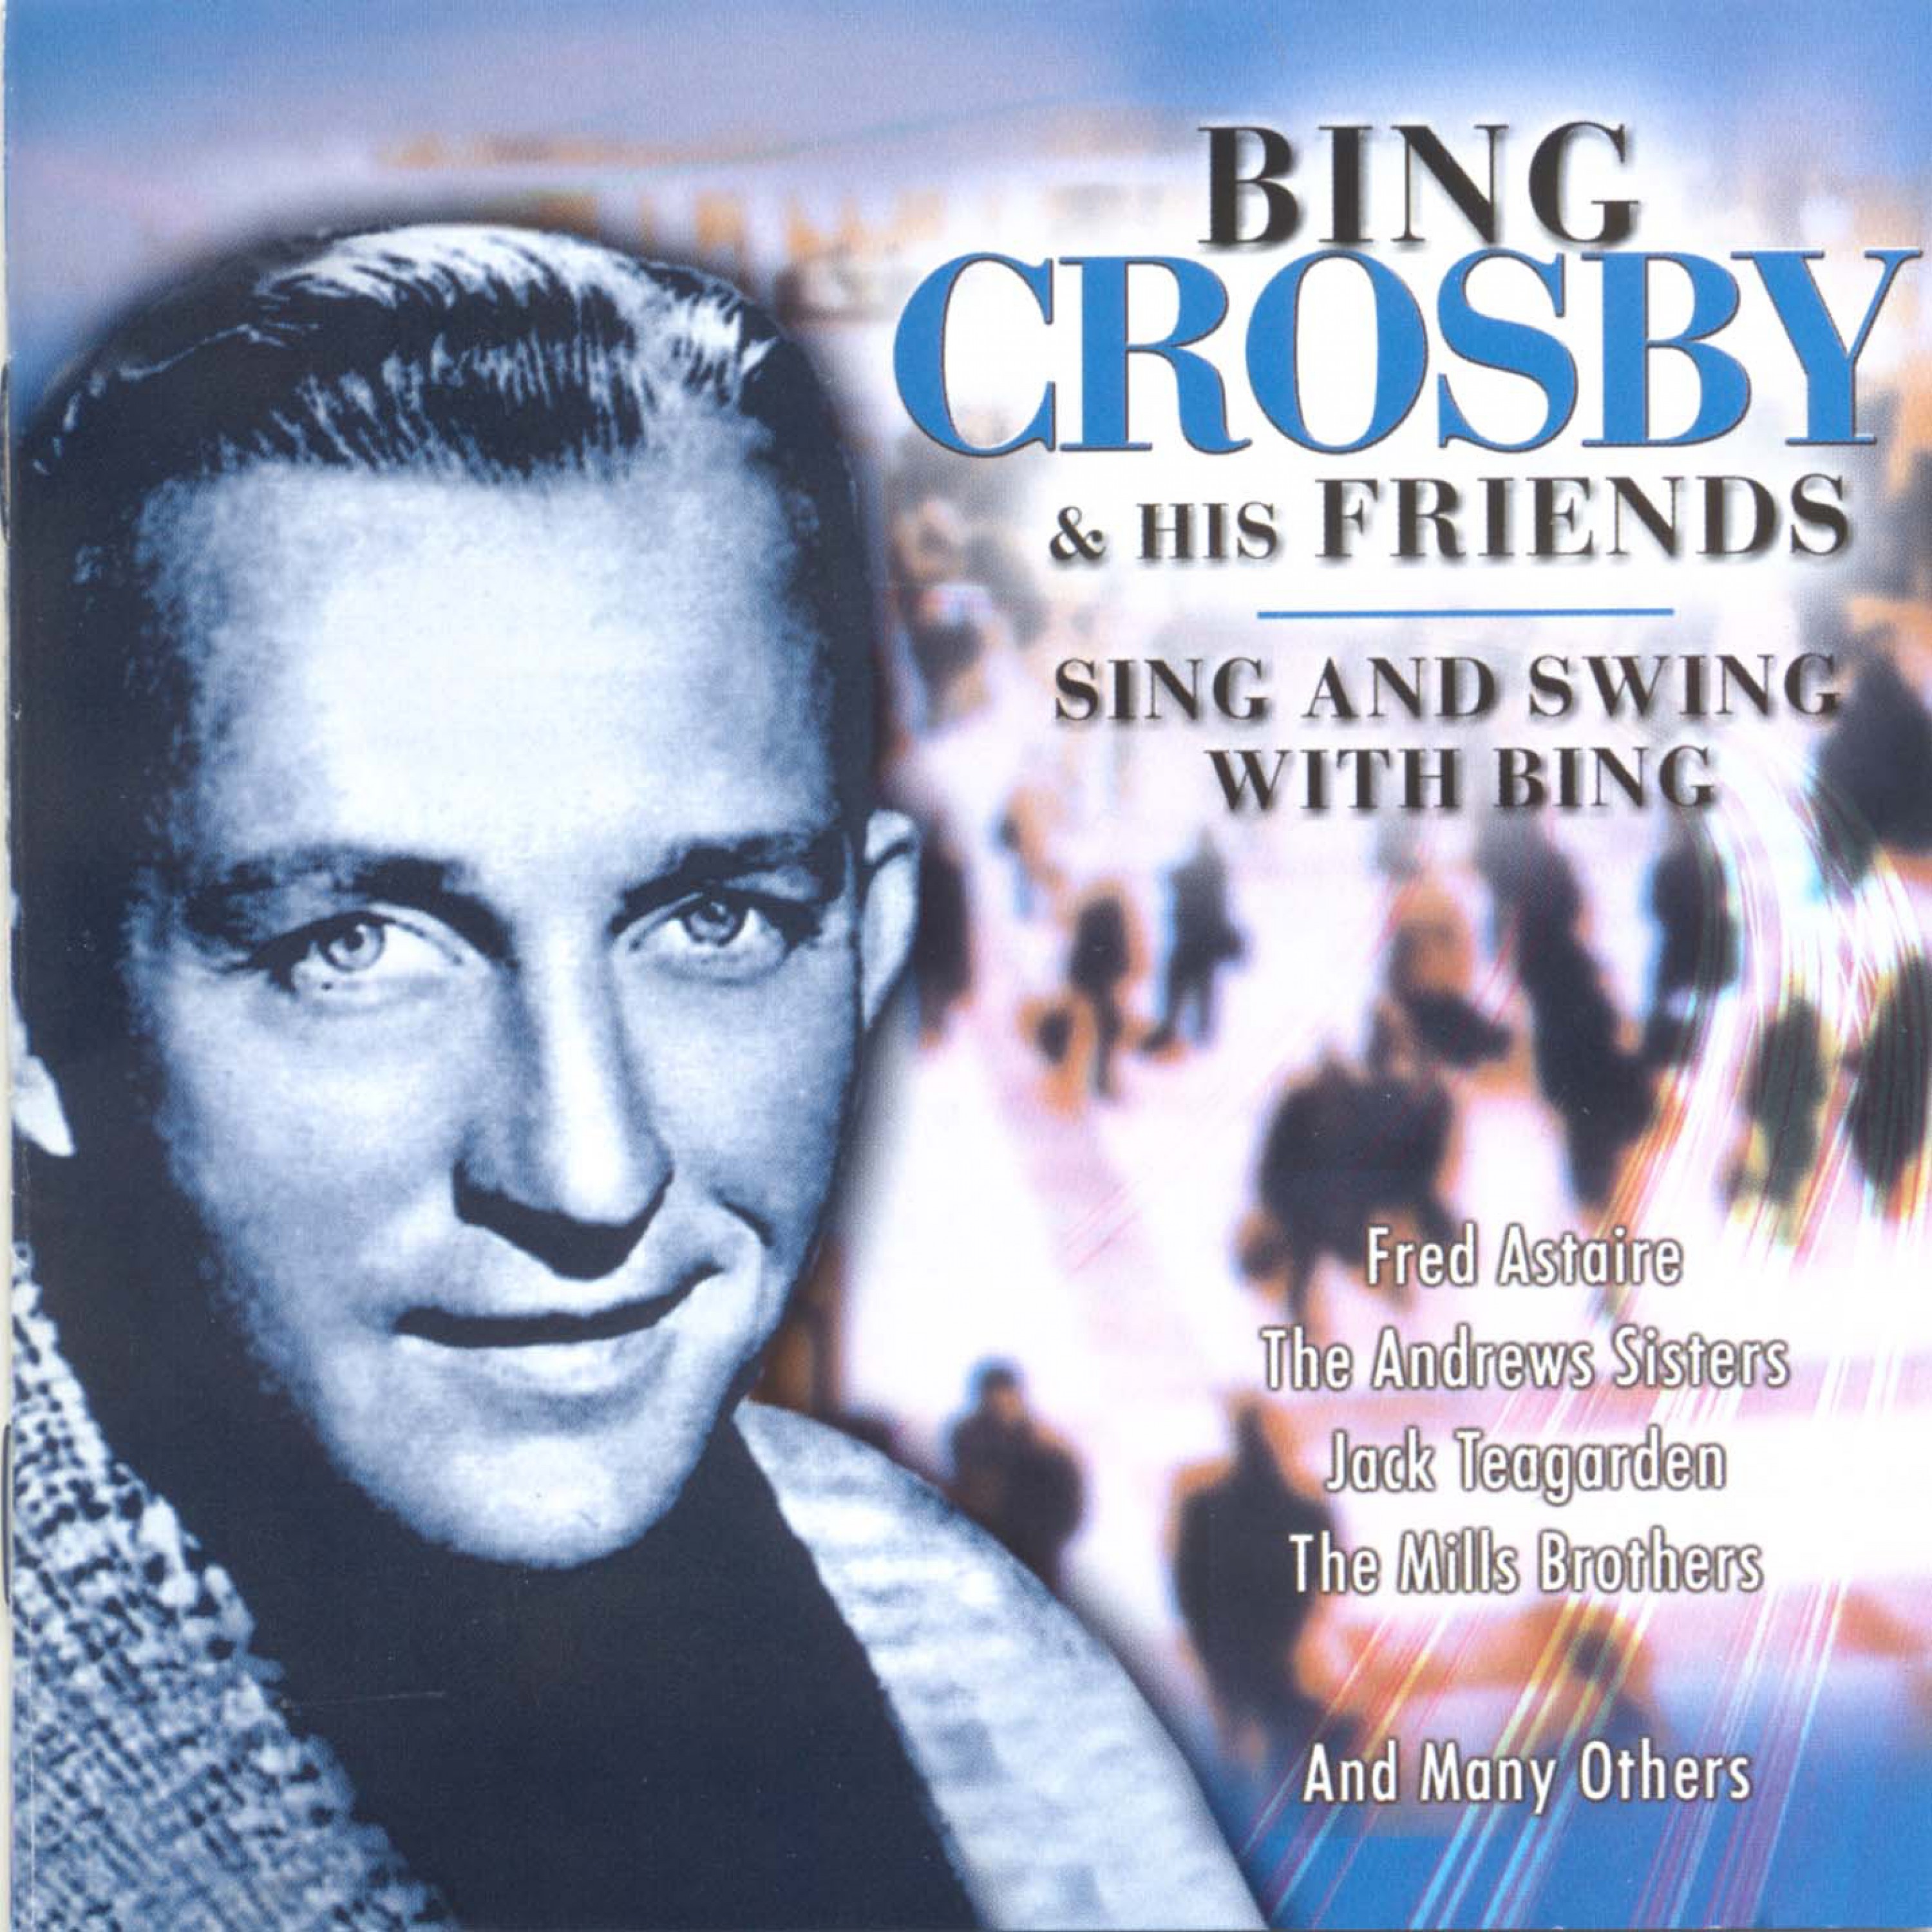 Bing Crosby & His Friends (Sing and Swing with Bing)